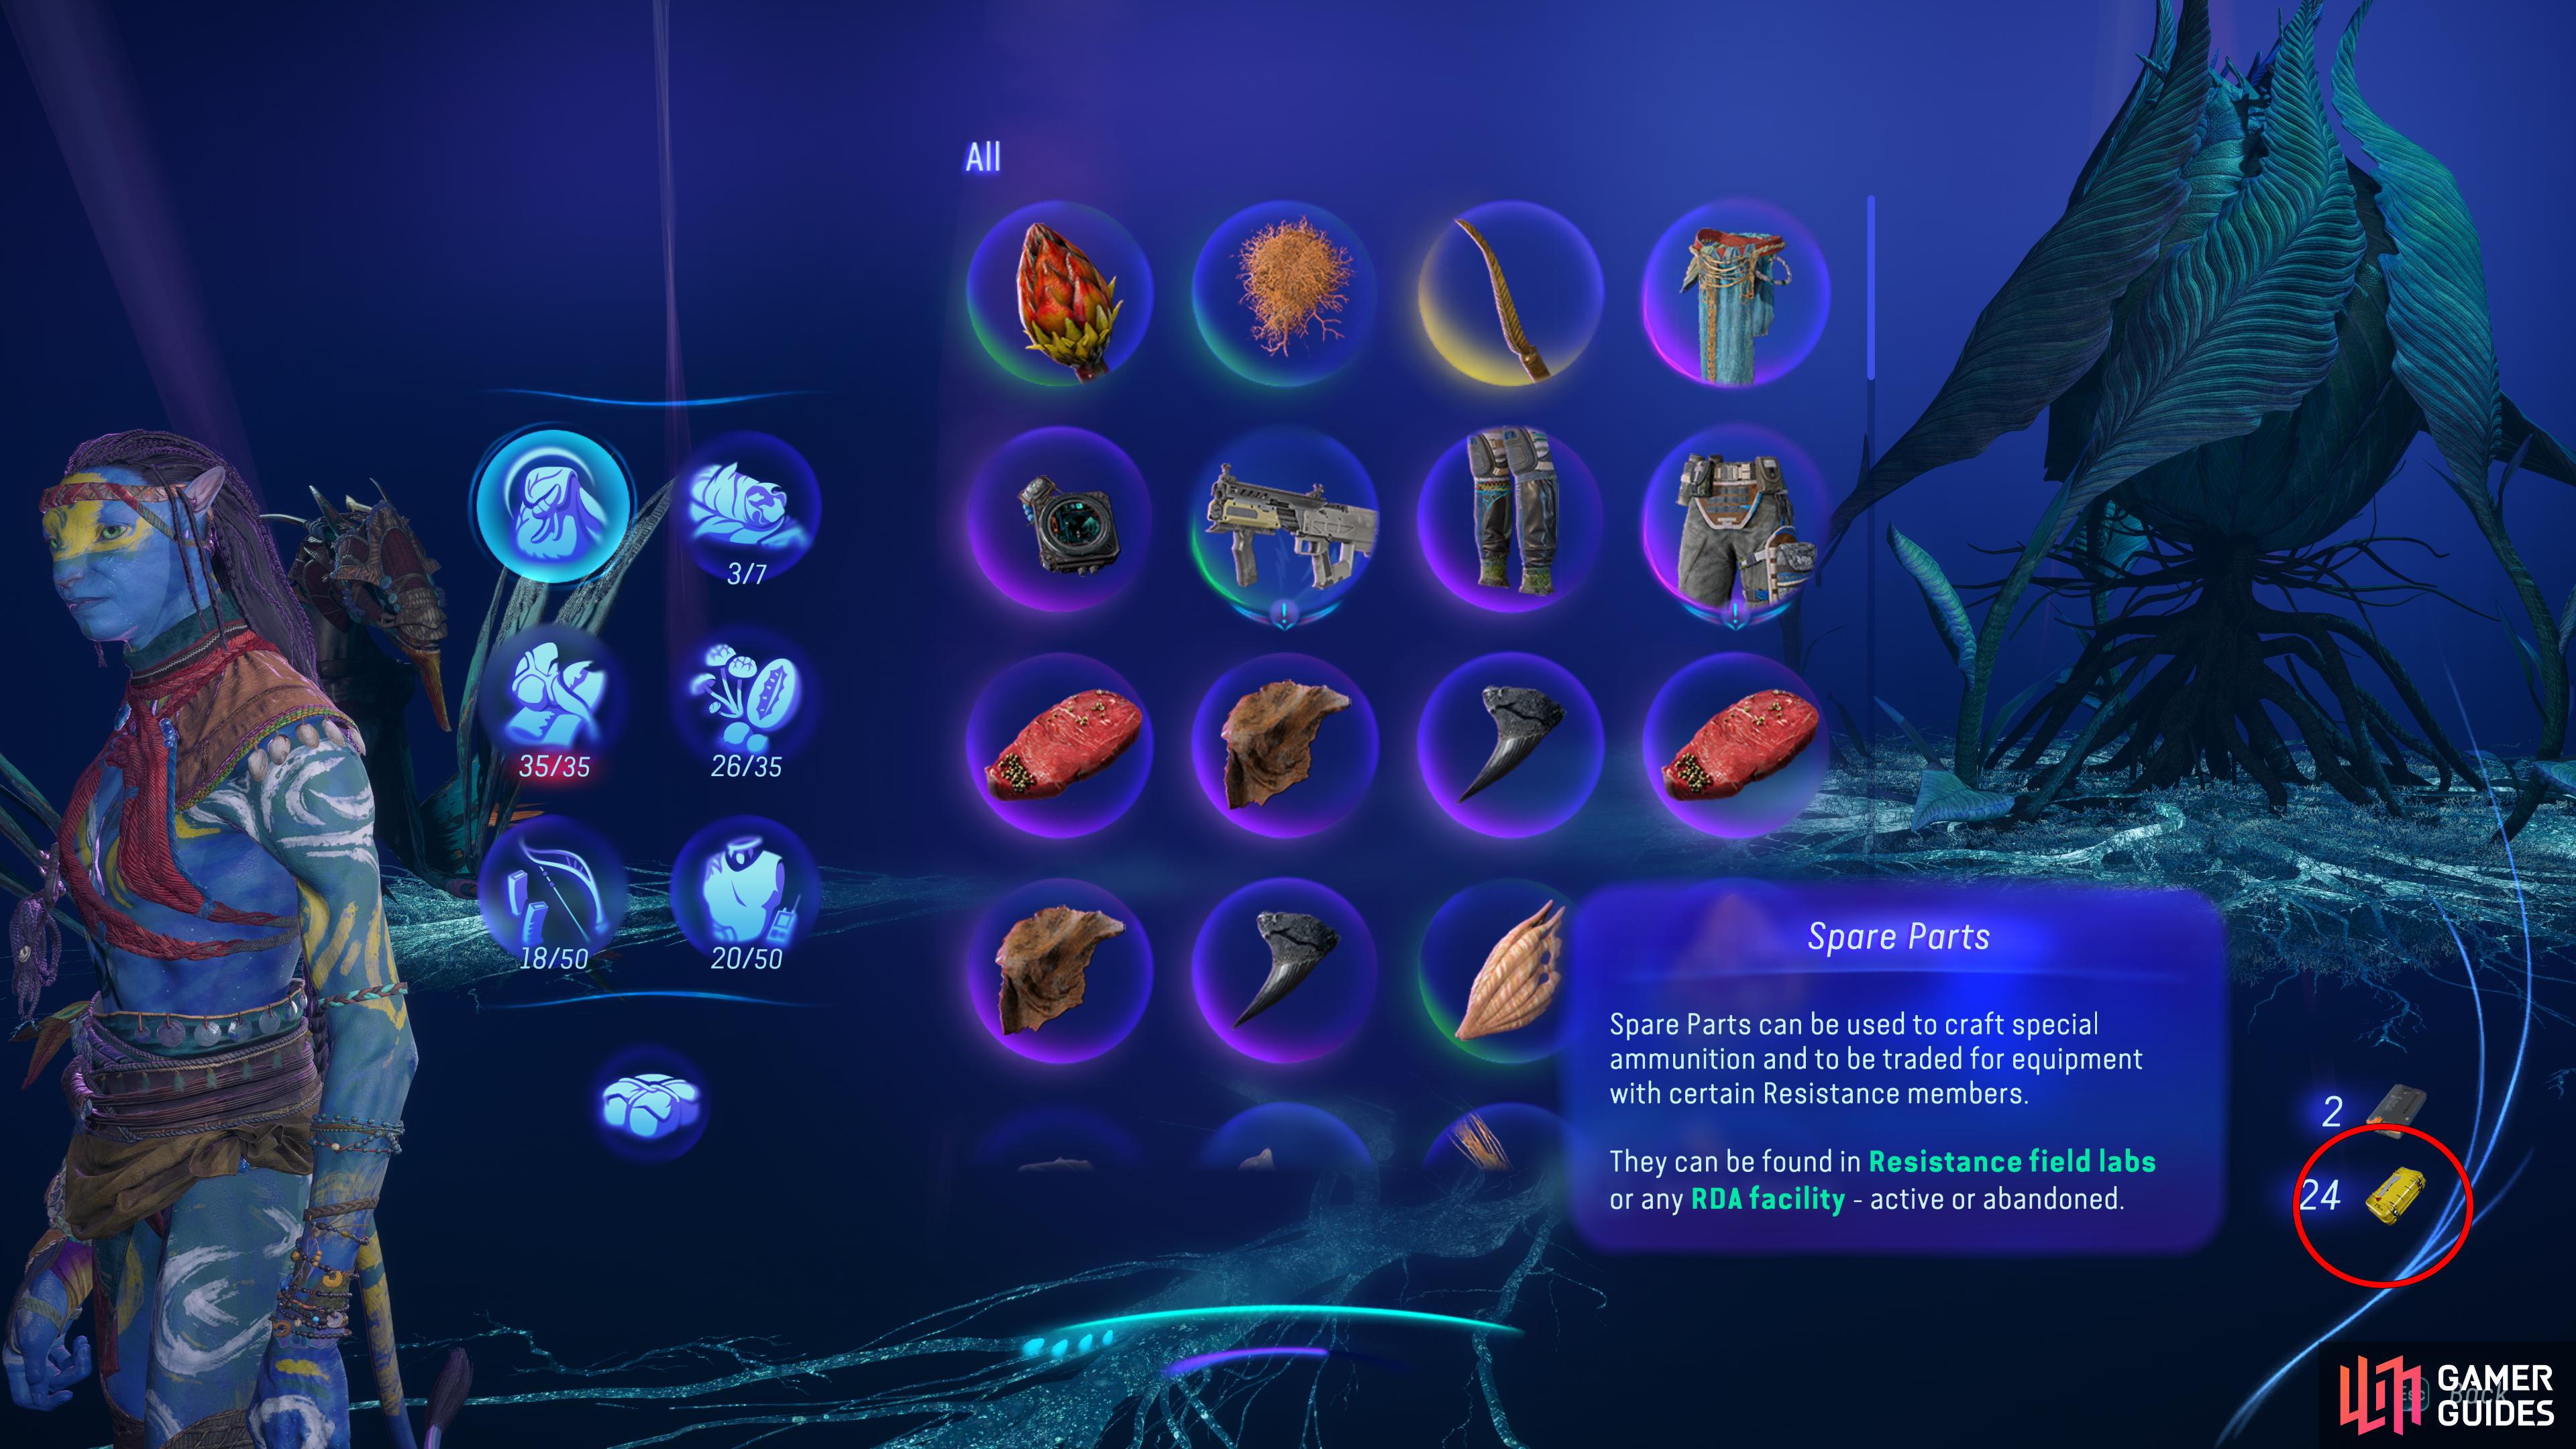 Spare Parts are both a resource and currency in Avatar: Frontiers of Pandora.